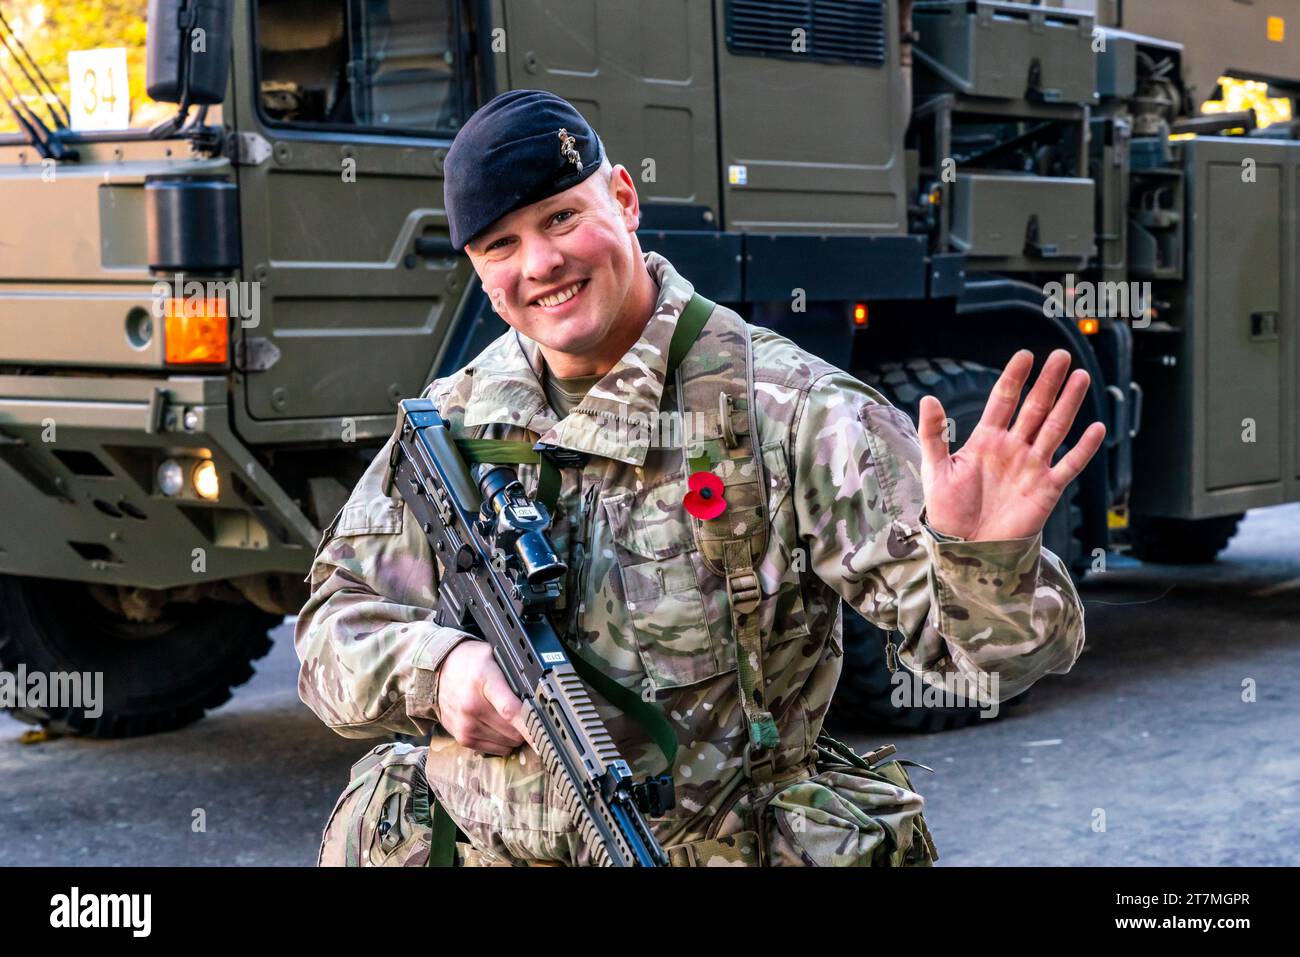 A Soldier From The 103 Battalion Royal Electrical & Mechanical Engineers Takes Part In Annual The Lord Mayor's Show, London, UK Stock Photo